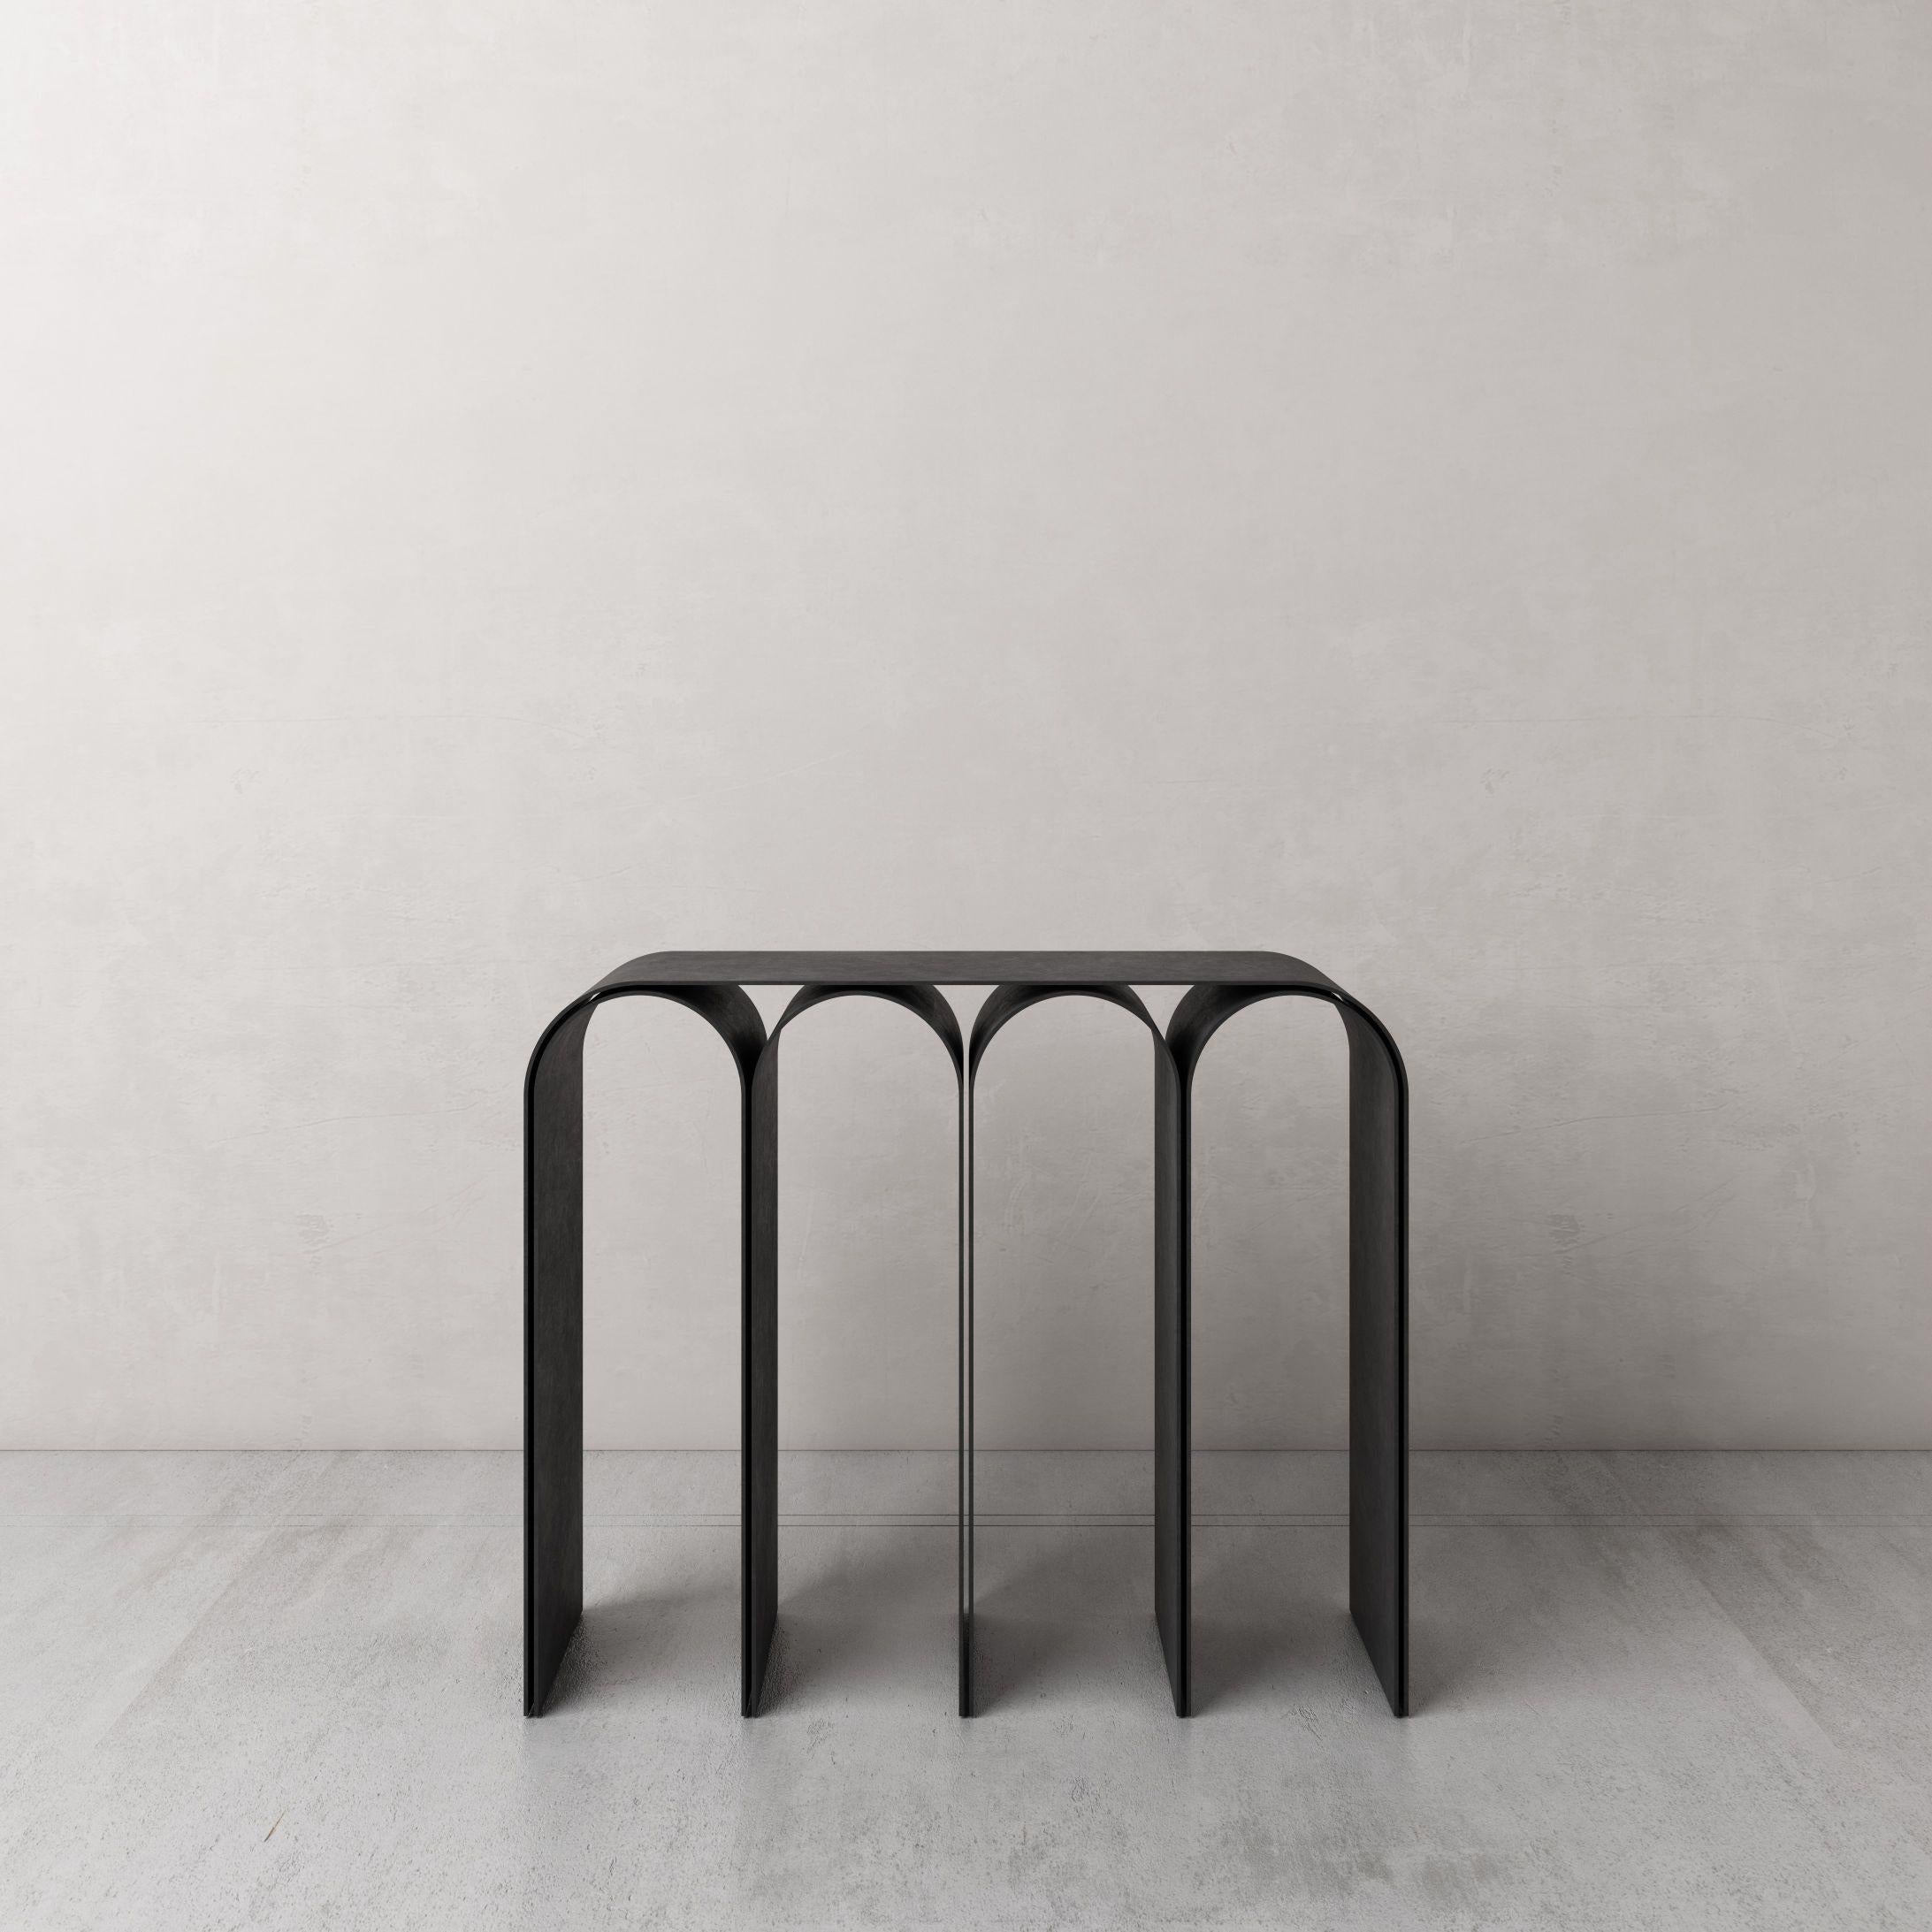 Gold arch console by Pietro Franceschini
Sold exclusively by Galerie Philia
Manufacturer: Prinzivalli
Dimensions: W 103 x L 30 x H 86 cm
Materials: Steel (Black finish)

Also available:
Steel (brass finish, blackened, satin)
Brass (natural, satin,